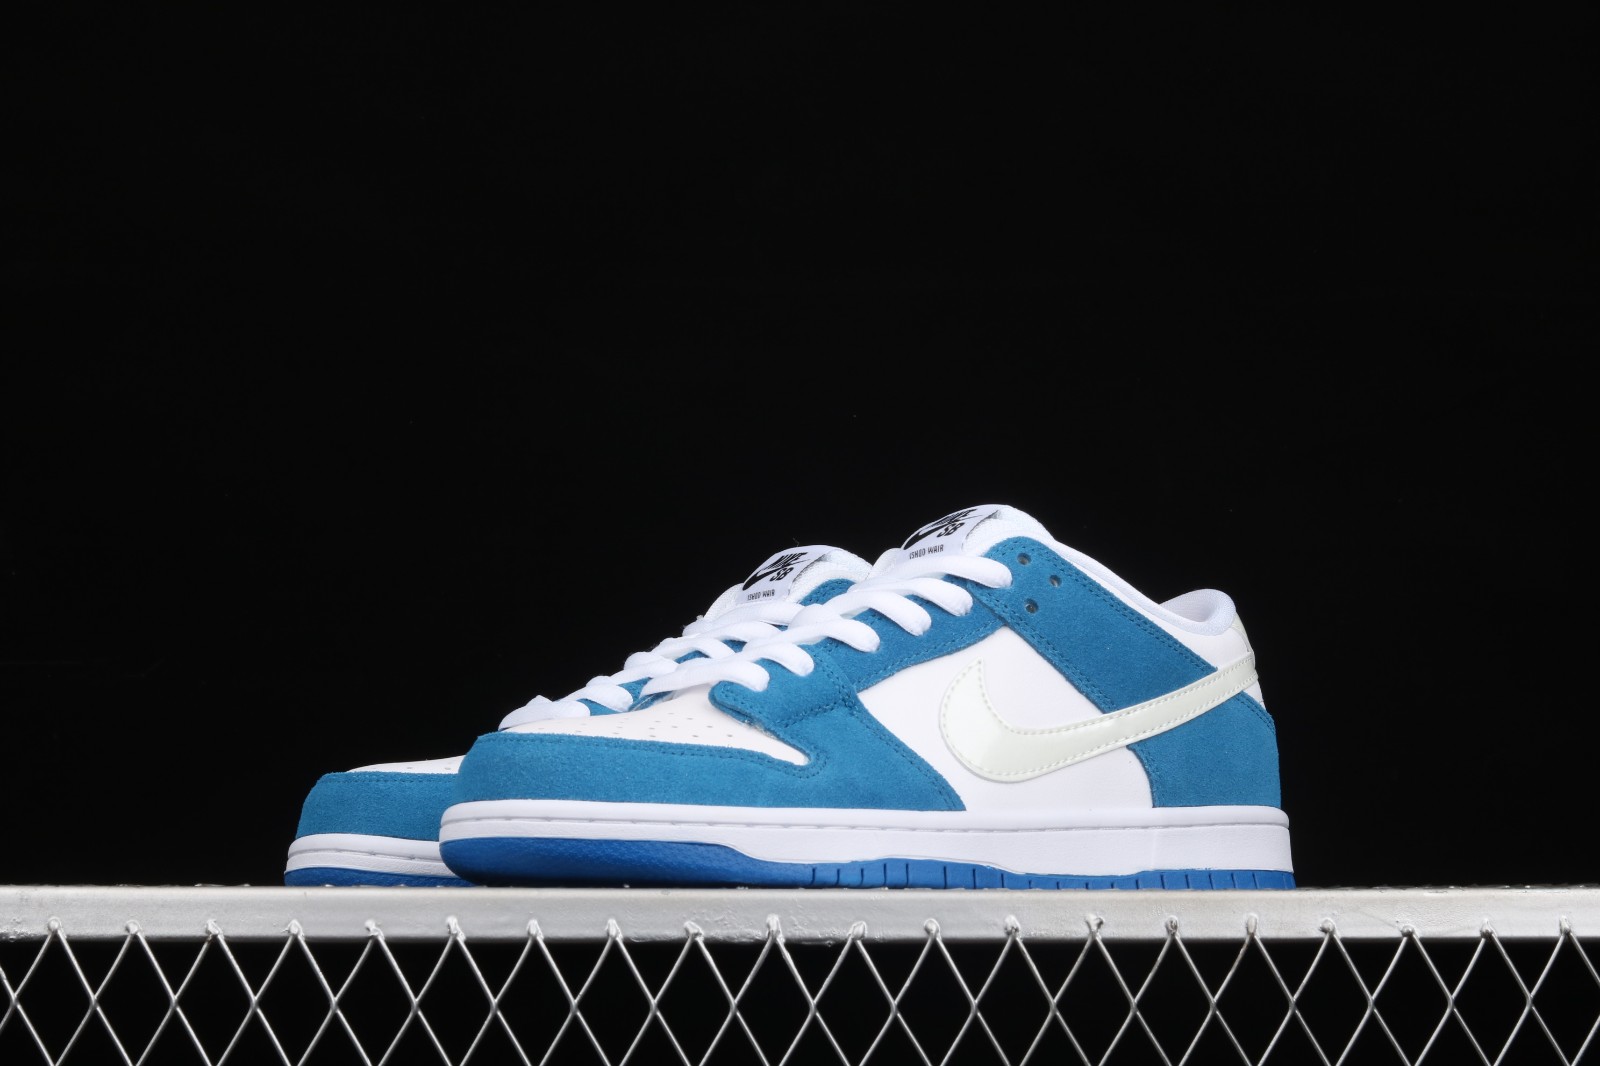 MultiscaleconsultingShops - Nike Dunk Summit Low Wair Blue Apark White Black 819674 - 410 - The Nike Space Hippie 01 Makes A In White And Blue